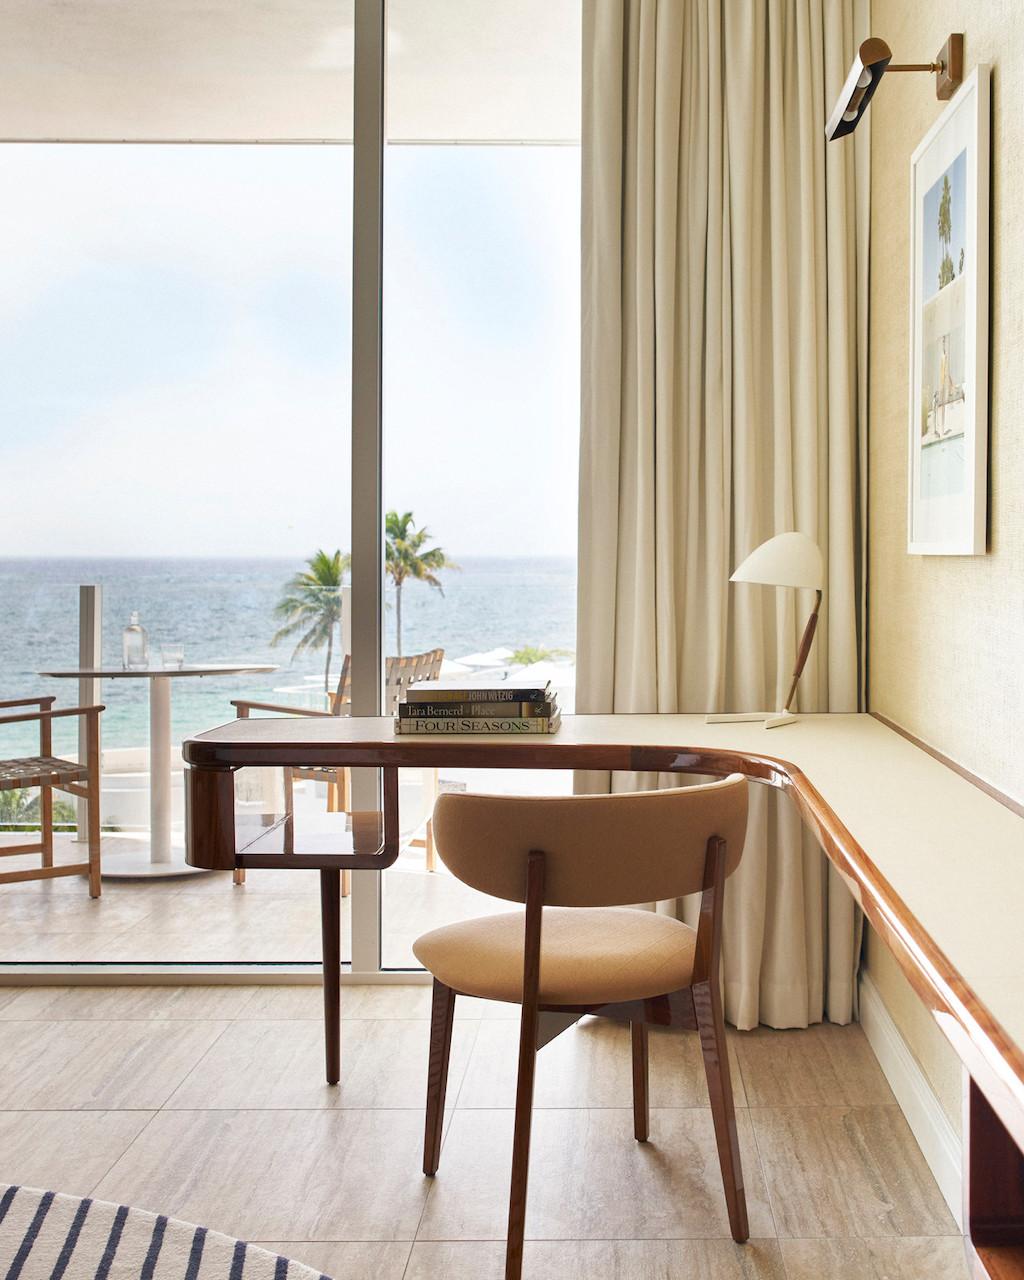 The Newest Four Seasons Hotel Hails Fort Lauderdale’s Yachting Heritage